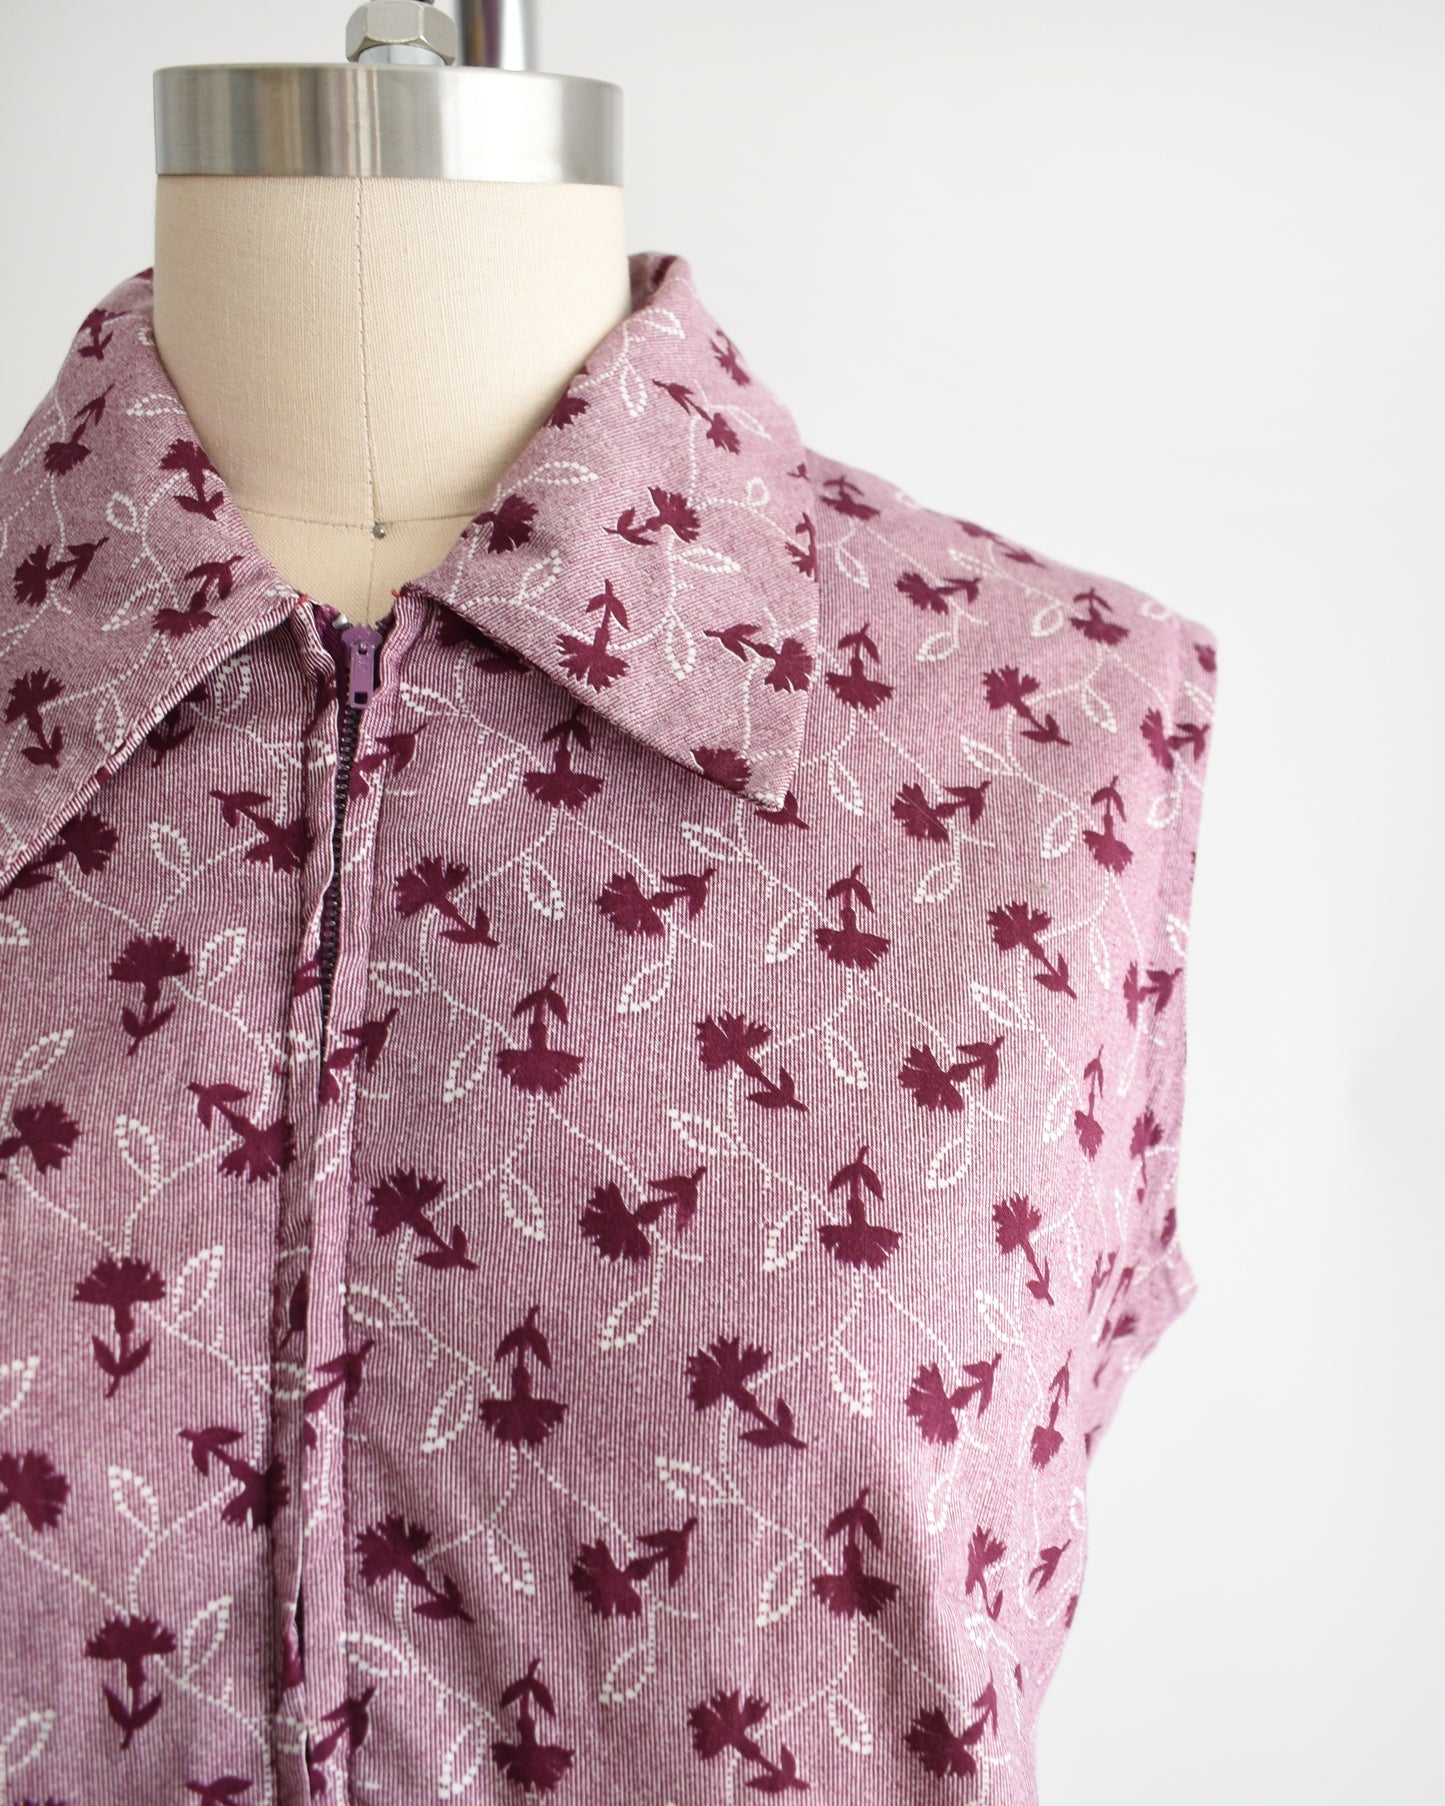 Close up of the collared neckline, floral print, and metal zipper